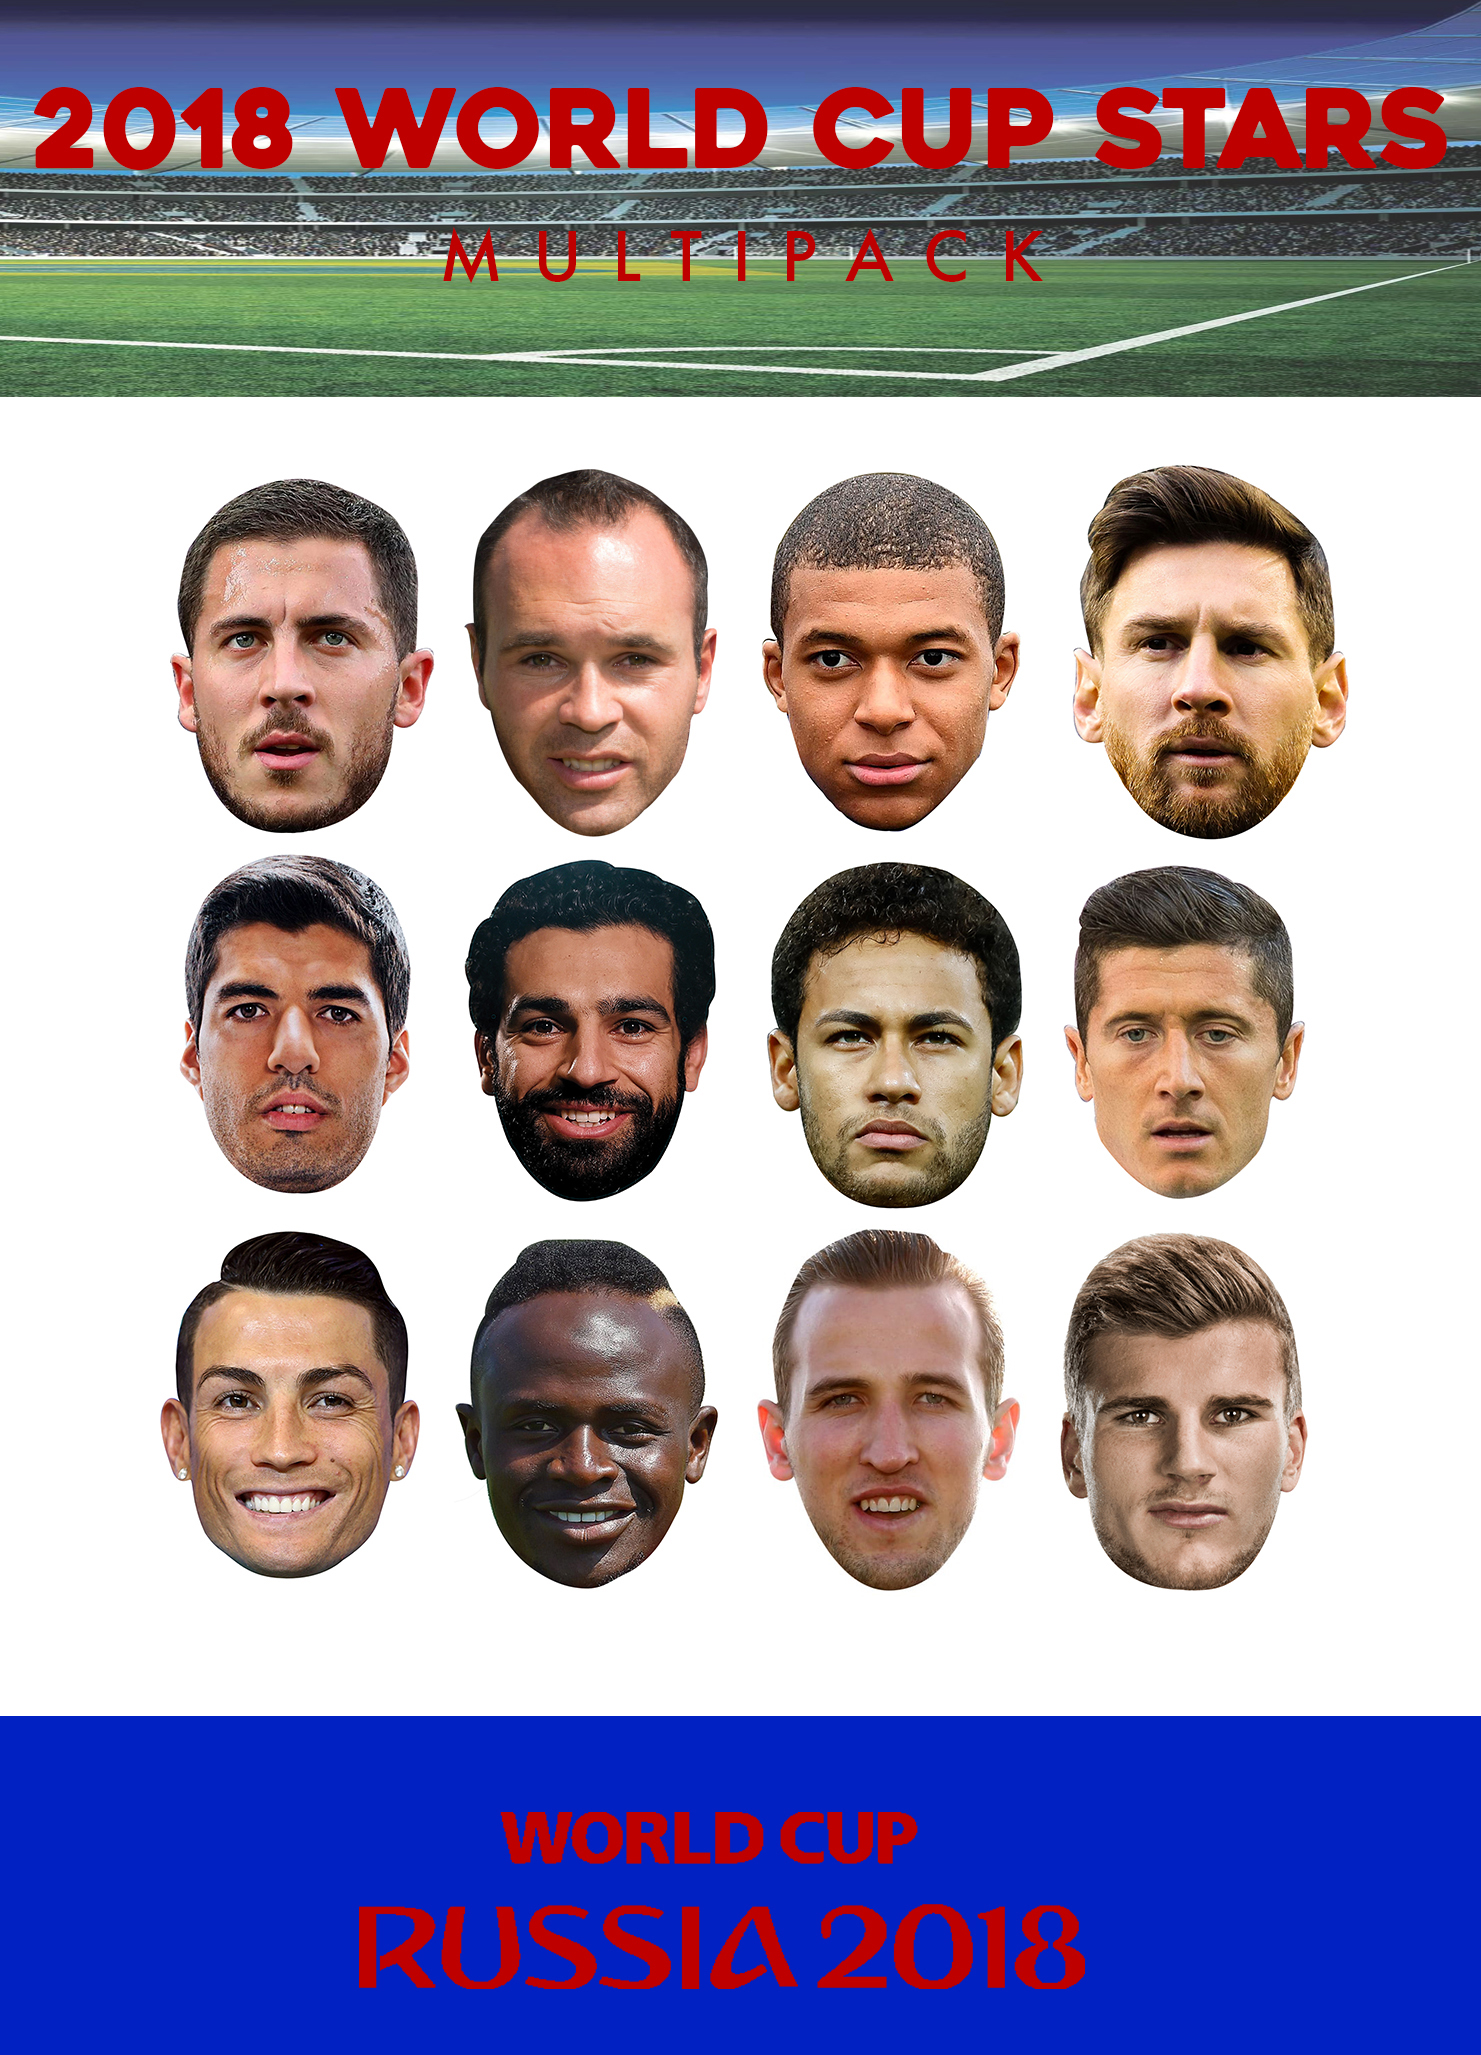 World Cup 2018 Stars Multipack 12 pack